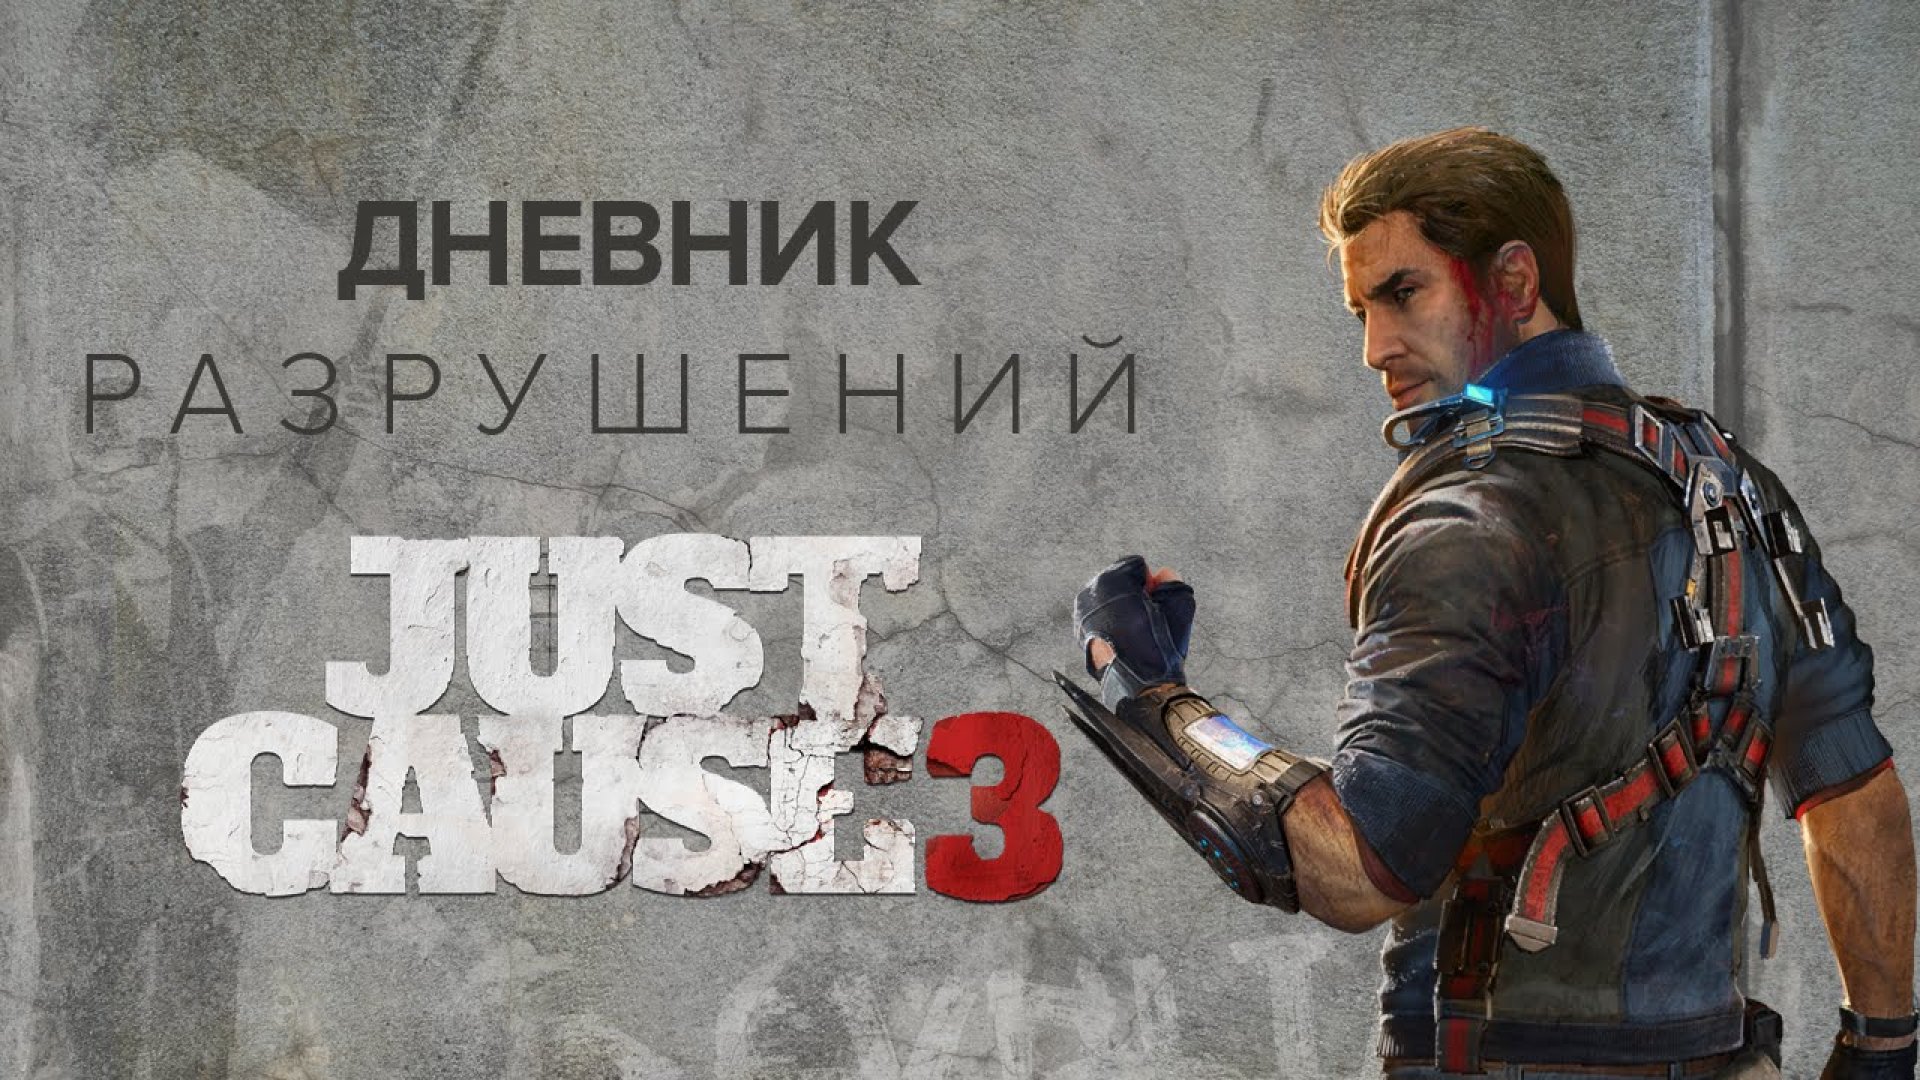 Is it just a game. Just cause 3. Just cause 3 картинки. Just cause 3 разрушение. Дневник разработчика игр.